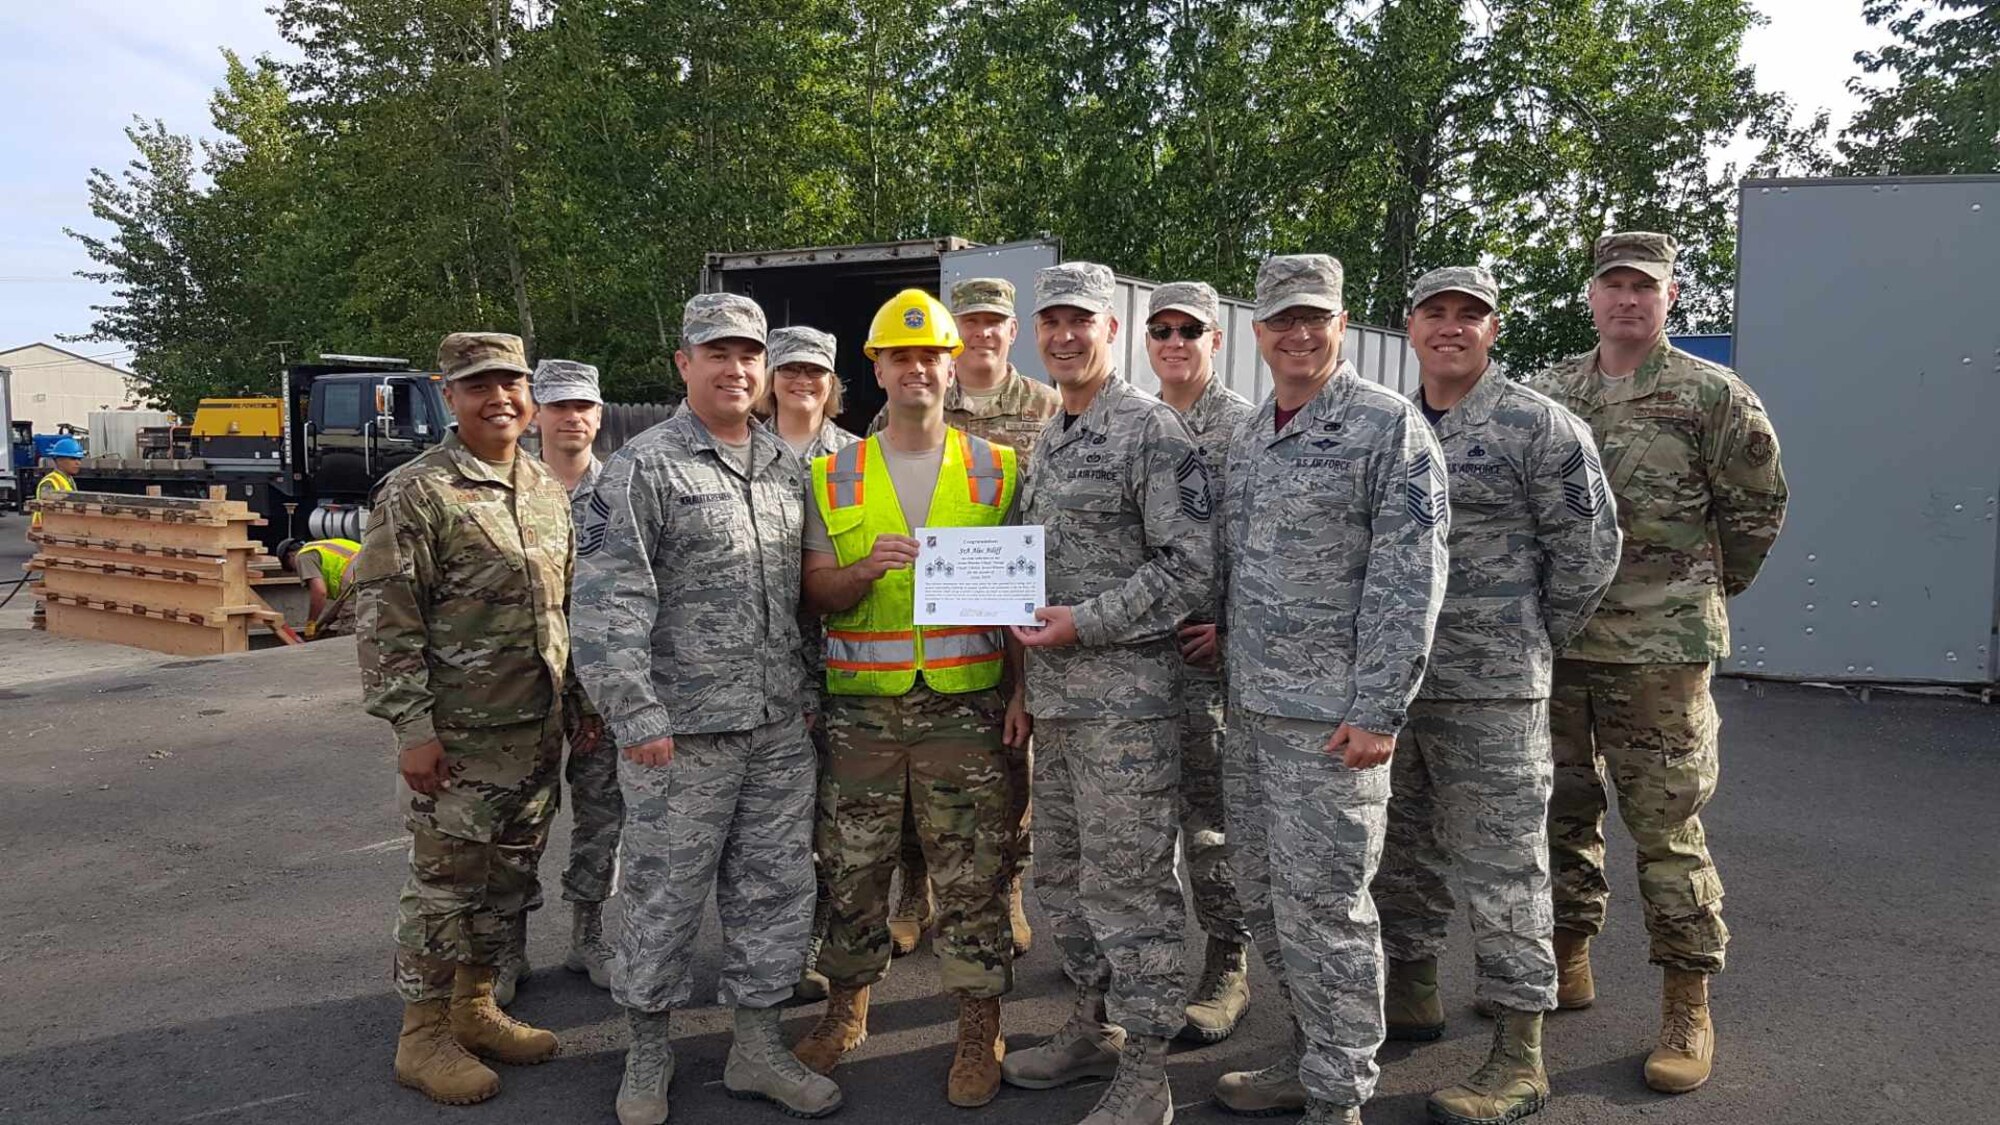 SrA Alec Ailiff was selected as the Chief's Choice Award winner of the month of June 2019.